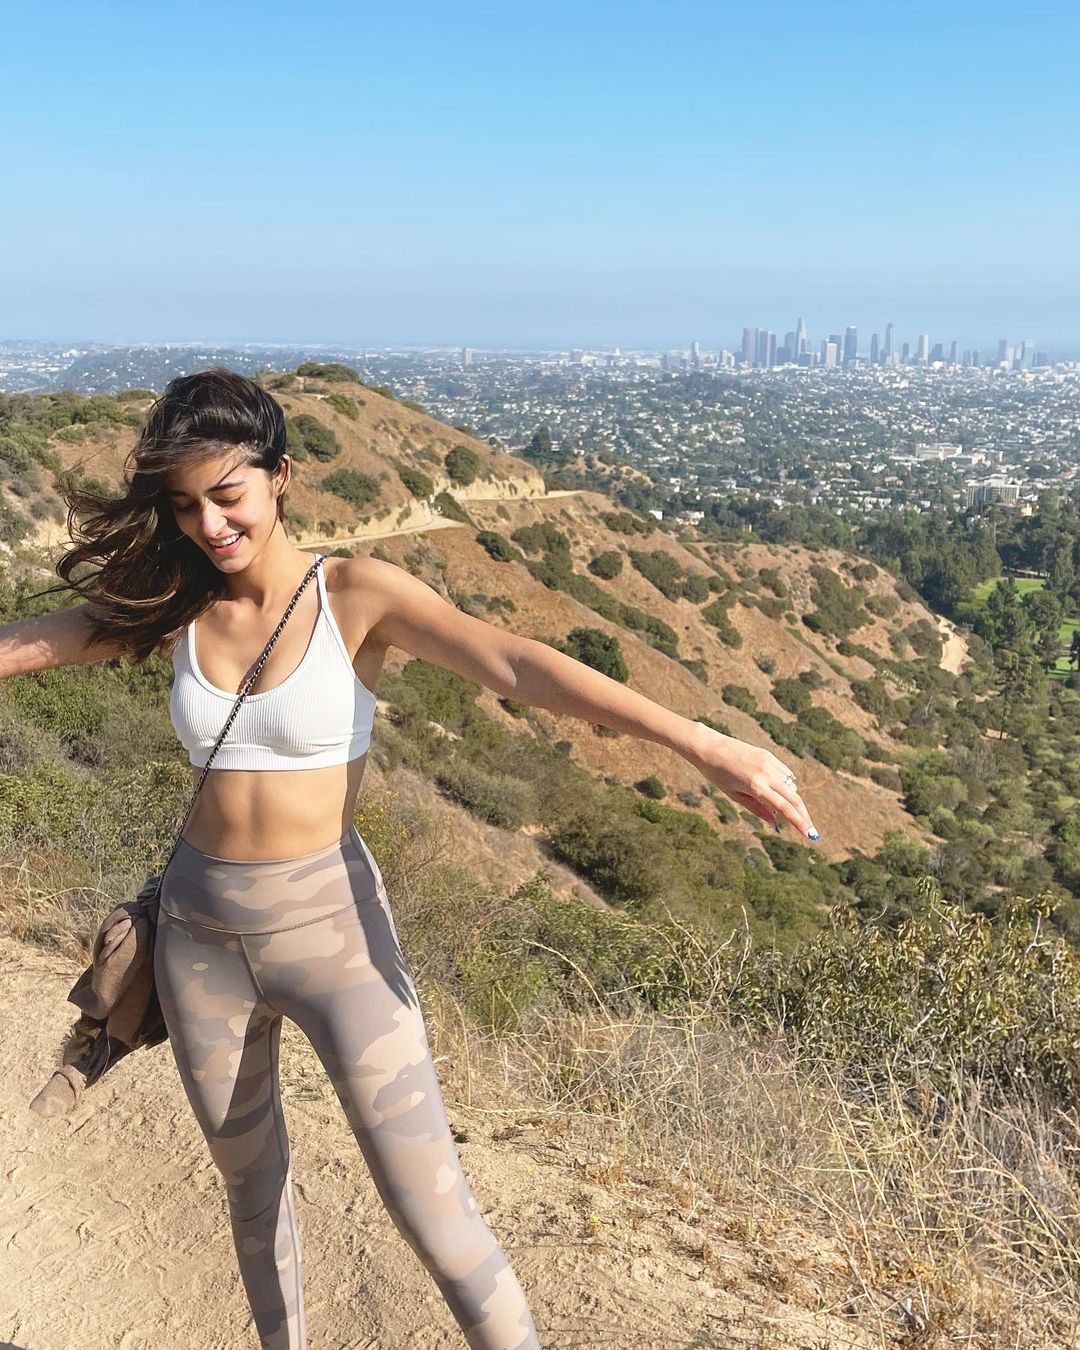 Ananya Panday Looks Smart And Chic In Black Sports Bra And